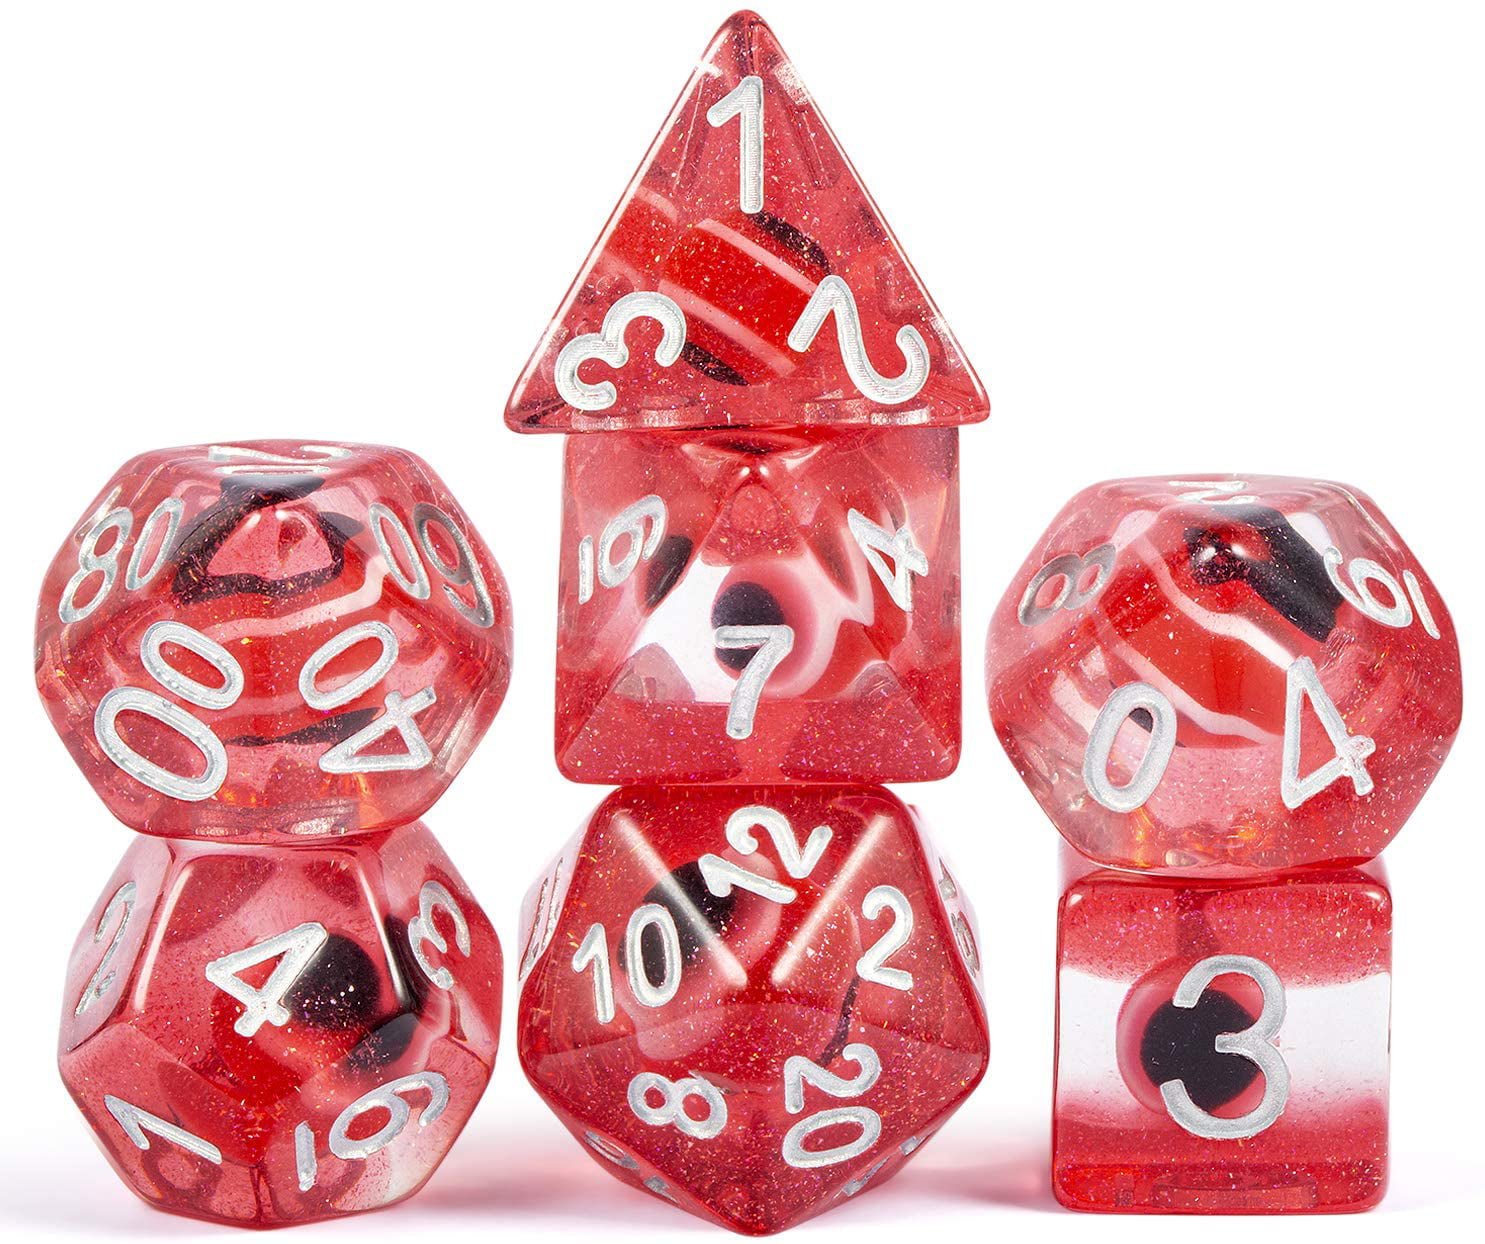 D10 Red Ten Sided Artificial Gem Dice for RPG Games Accessory Set of 10 Dice 